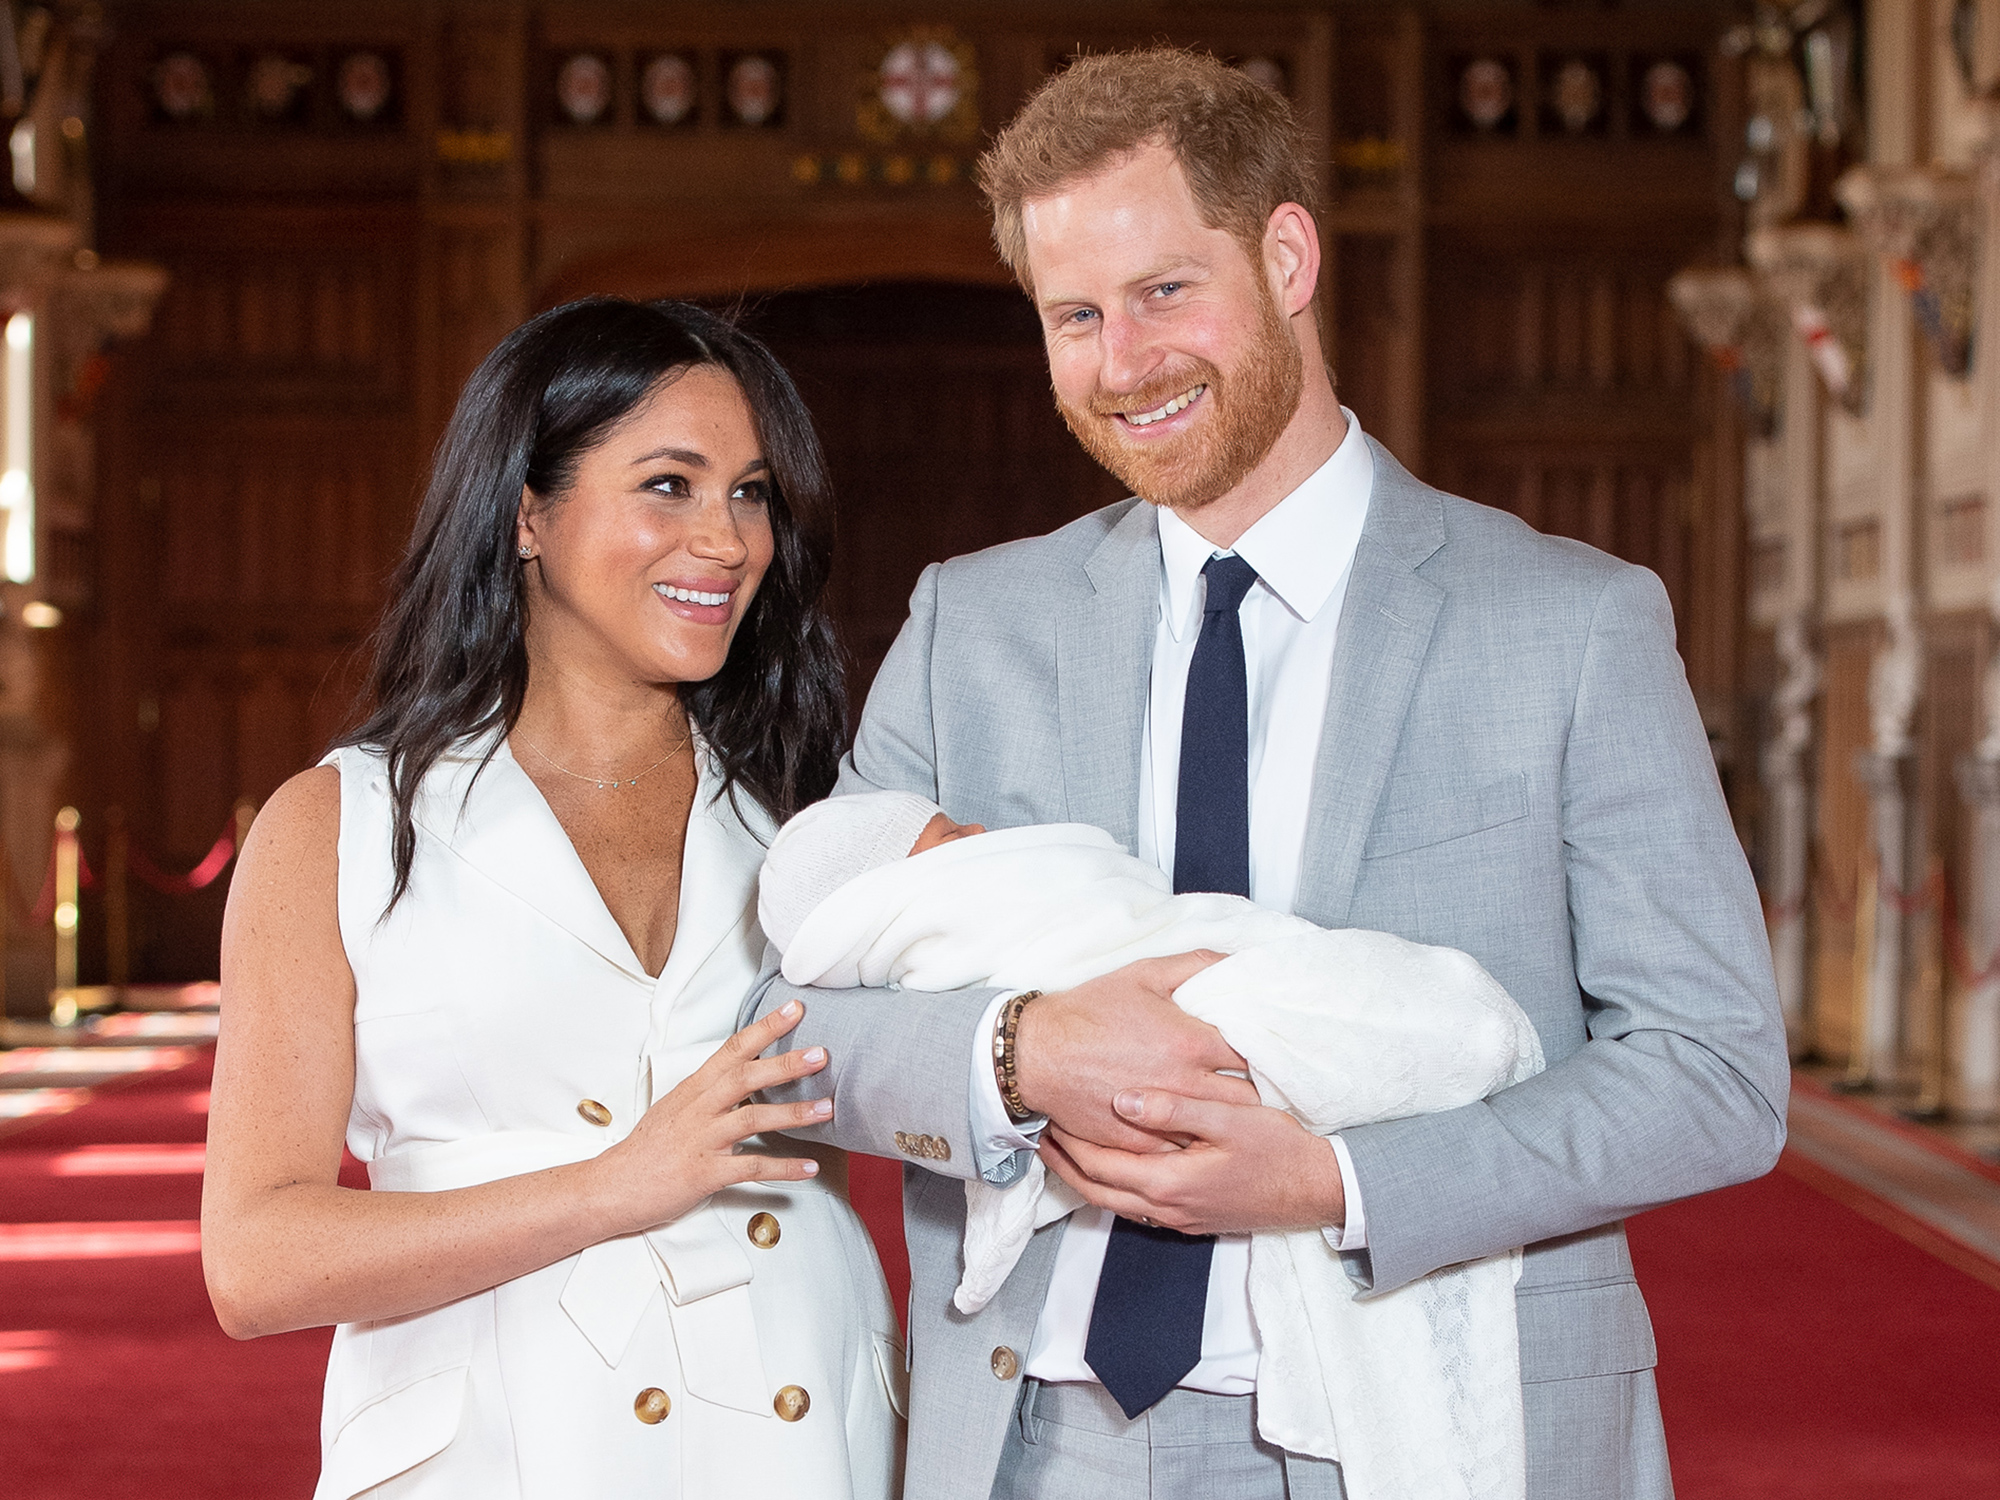 Prince Harry, Duke of Sussex and Meghan, Duchess of Sussex, pose with their newborn son Archie Harrison Mountbatten-Windsor during a photocall in St George's Hall at Windsor Castle on May 8, 2019 in Windsor, England. The Duchess of Sussex gave birth at 05:26 on Monday 06 May, 2019